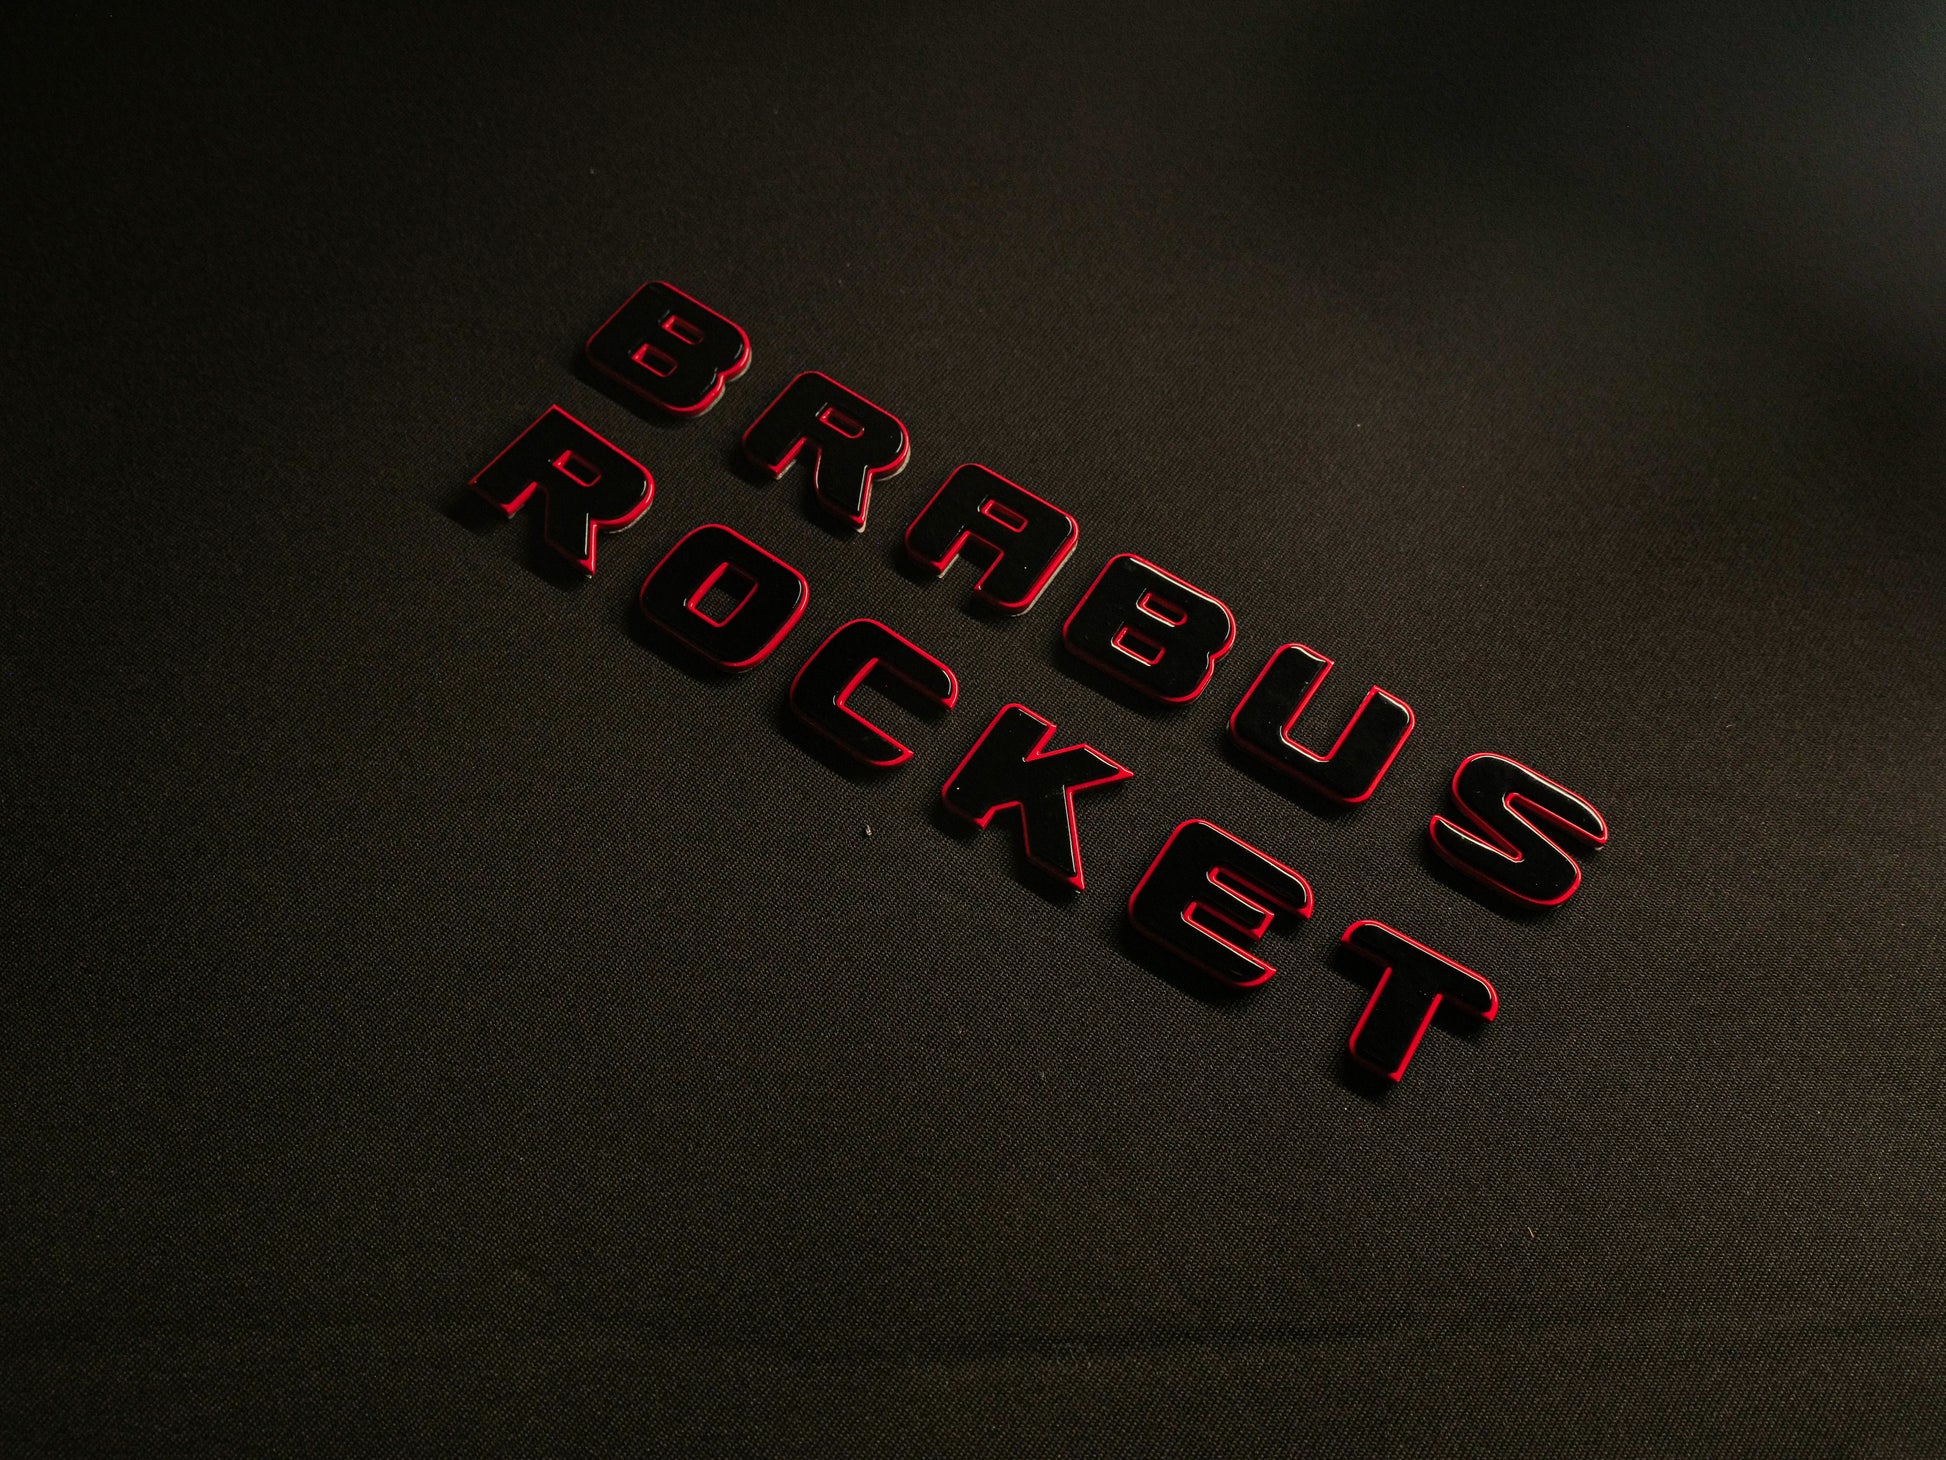 Brabus Rear Emblem Red and Black Badge for Mercedes-Benz Cars